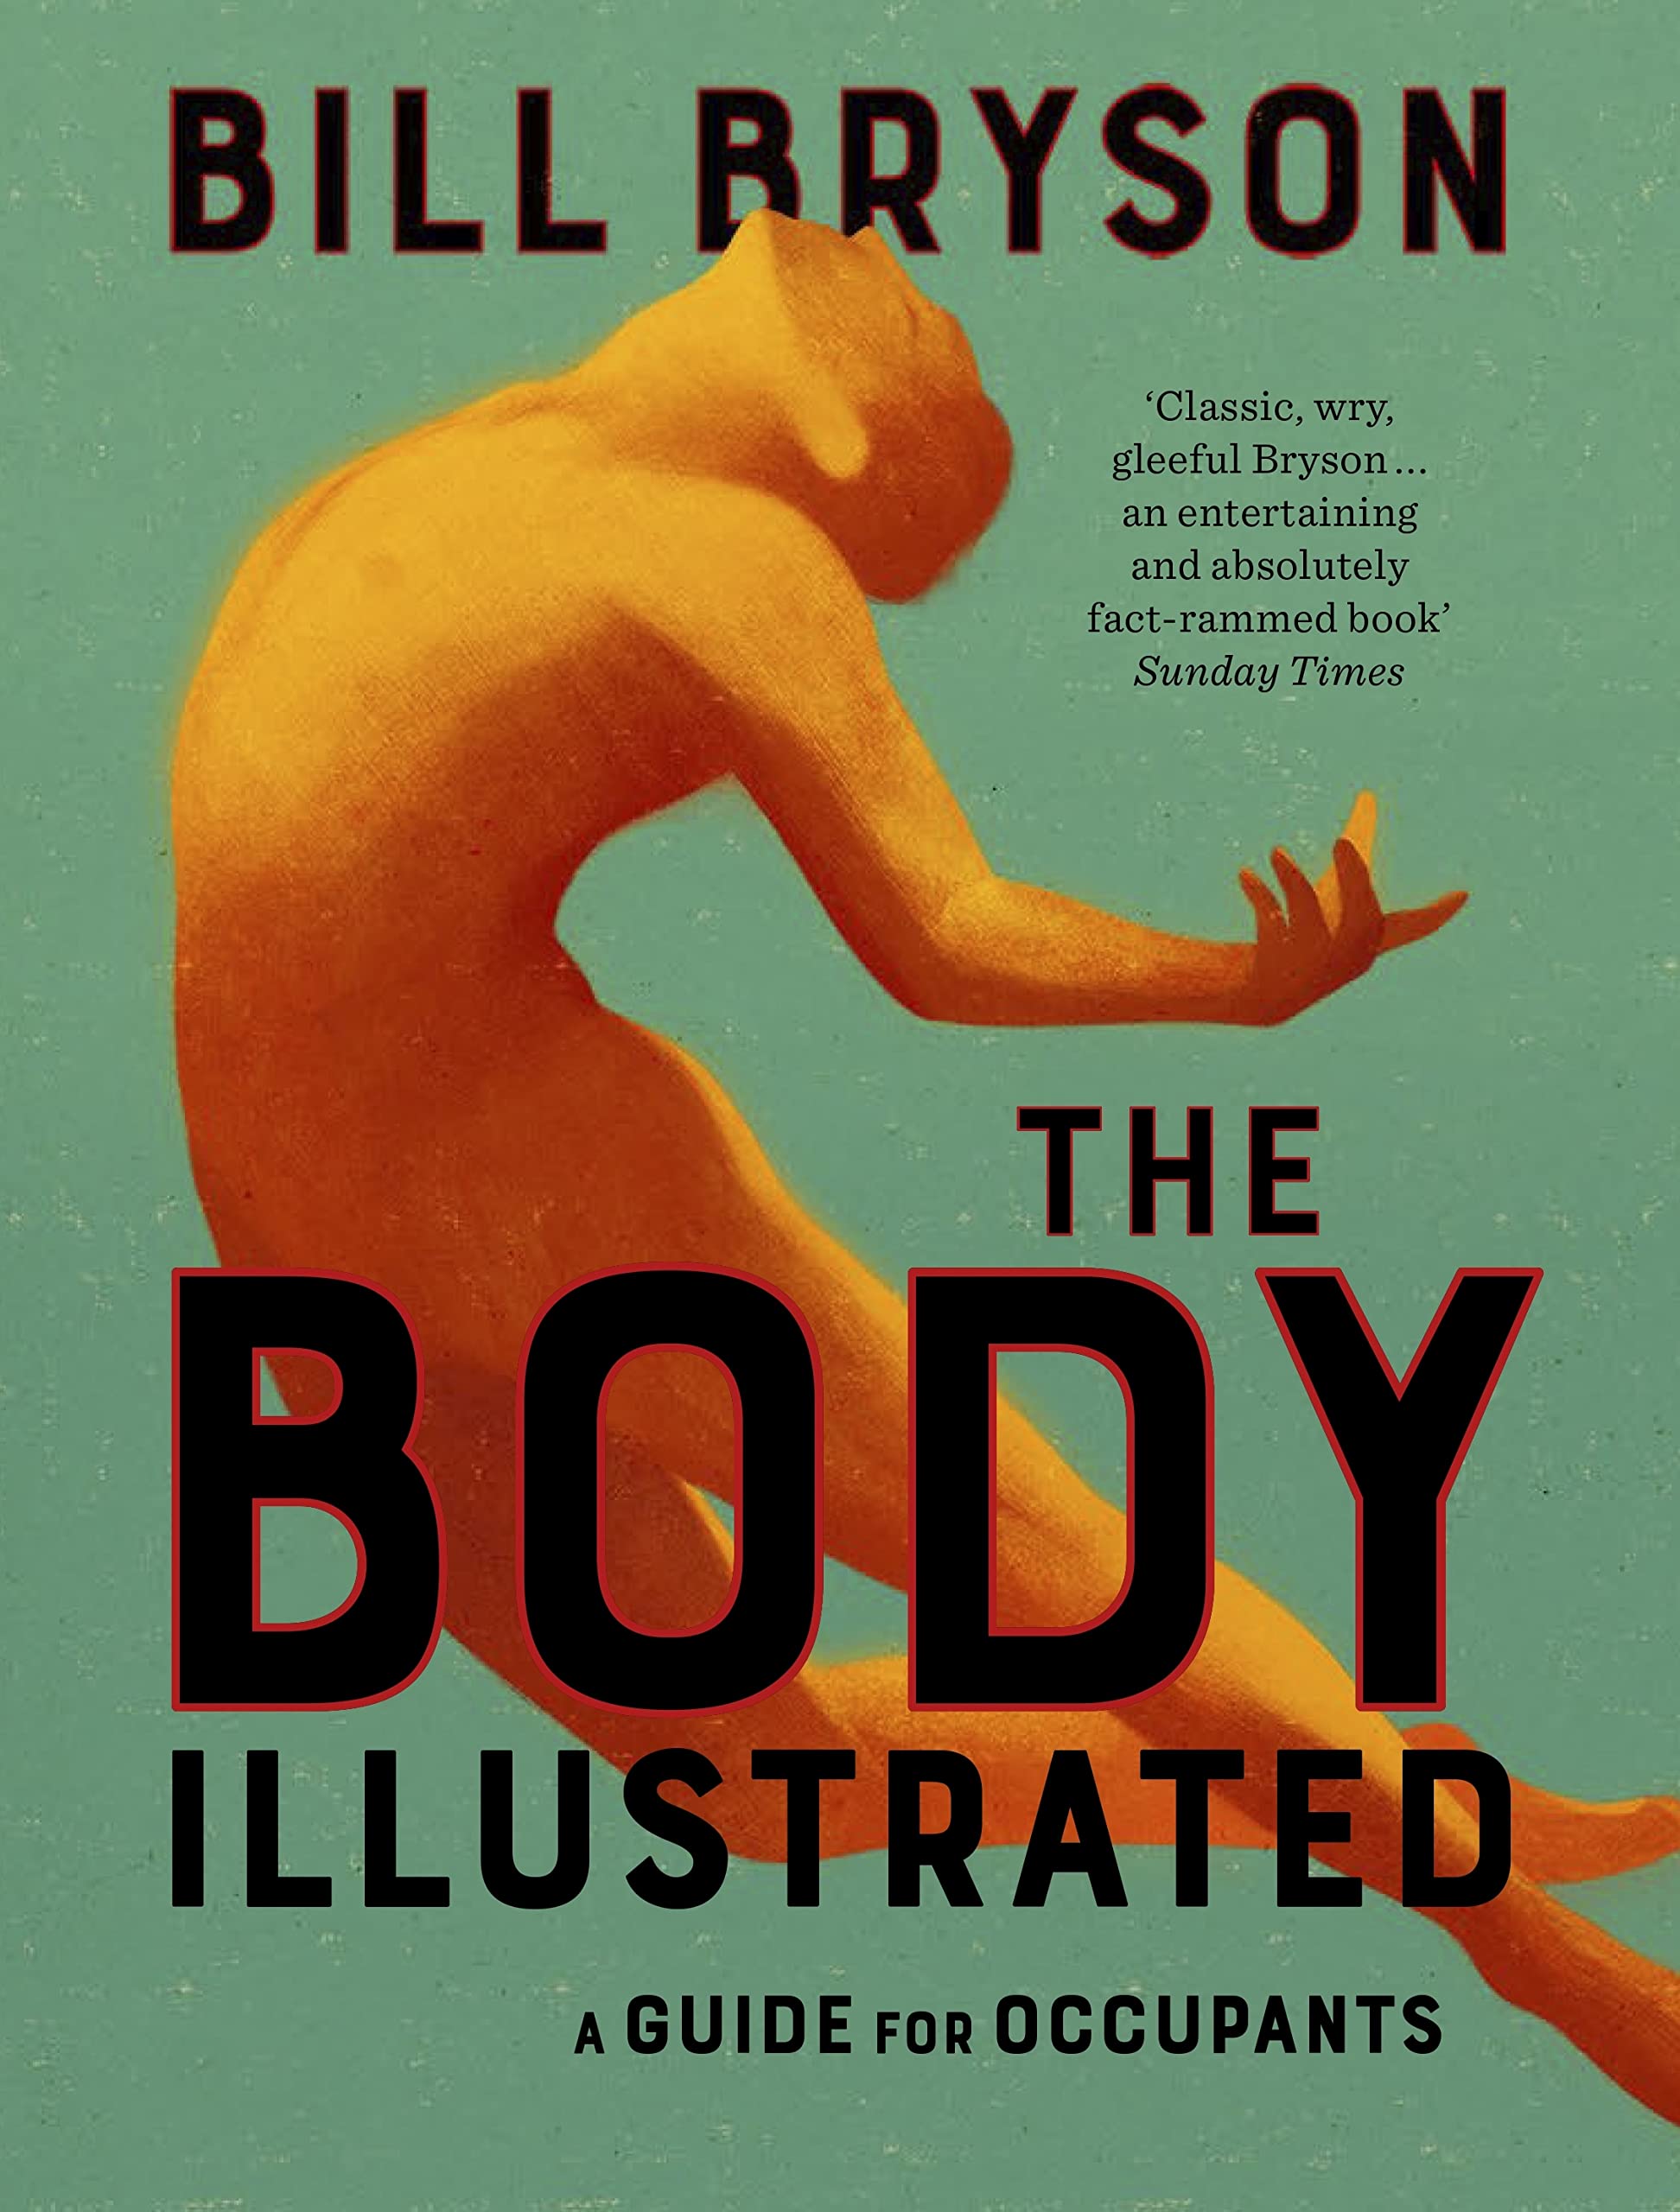 the body a guide for occupants summary